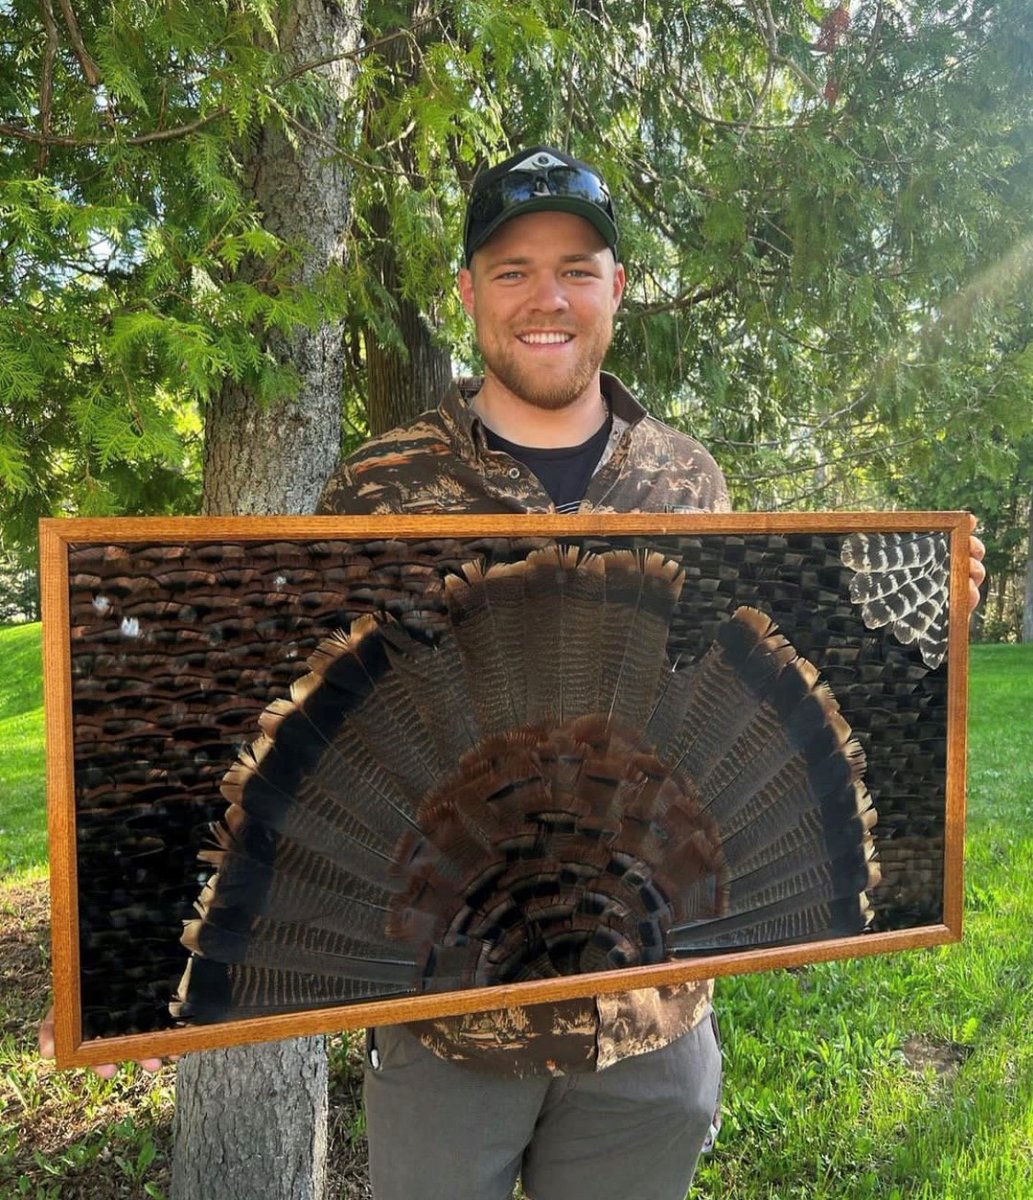 Who would love to have a display like this one made by @natehovingoutdoors, who spent 13 hours putting this work of art together. - Shared by @DruryOutdoors 

#FindYourAdventure #hunting #art #wildturkey #turkeyhunting #turkeyseason #wallart #picture